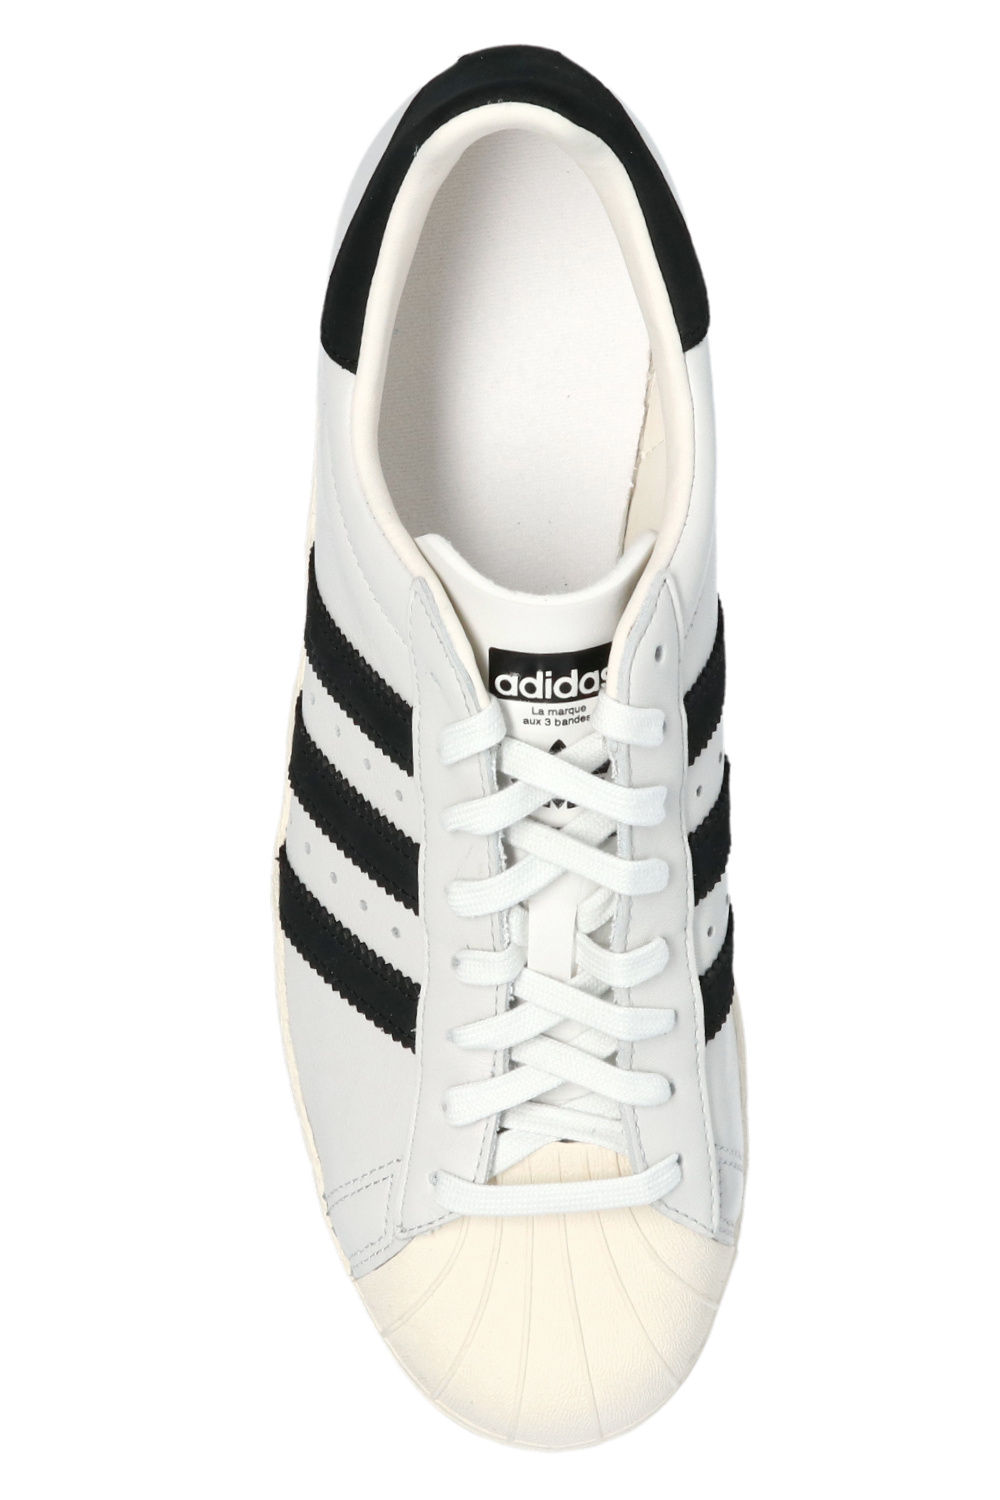 Superstar Recon' sneakers ADIDAS Originals - IetpShops GB - sole outlet size chart free